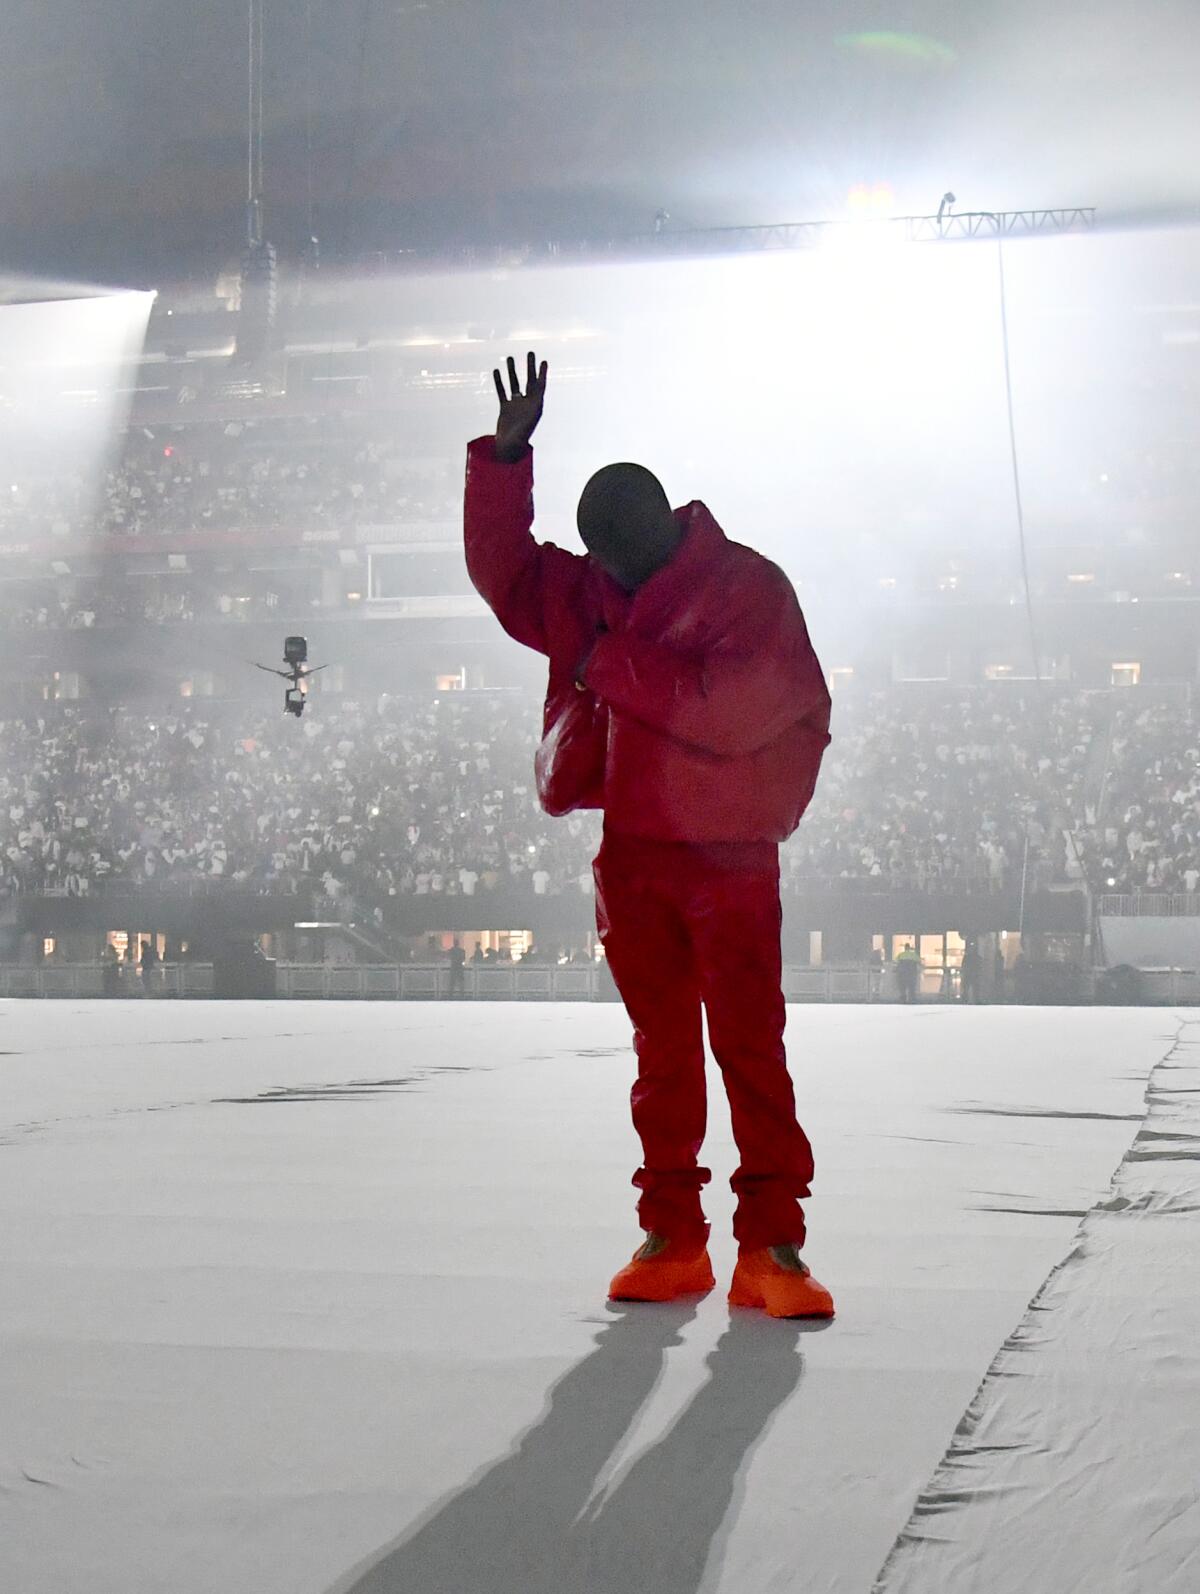 Kanye West's 'Donda' Tour: The Love Affair Between Kanye and